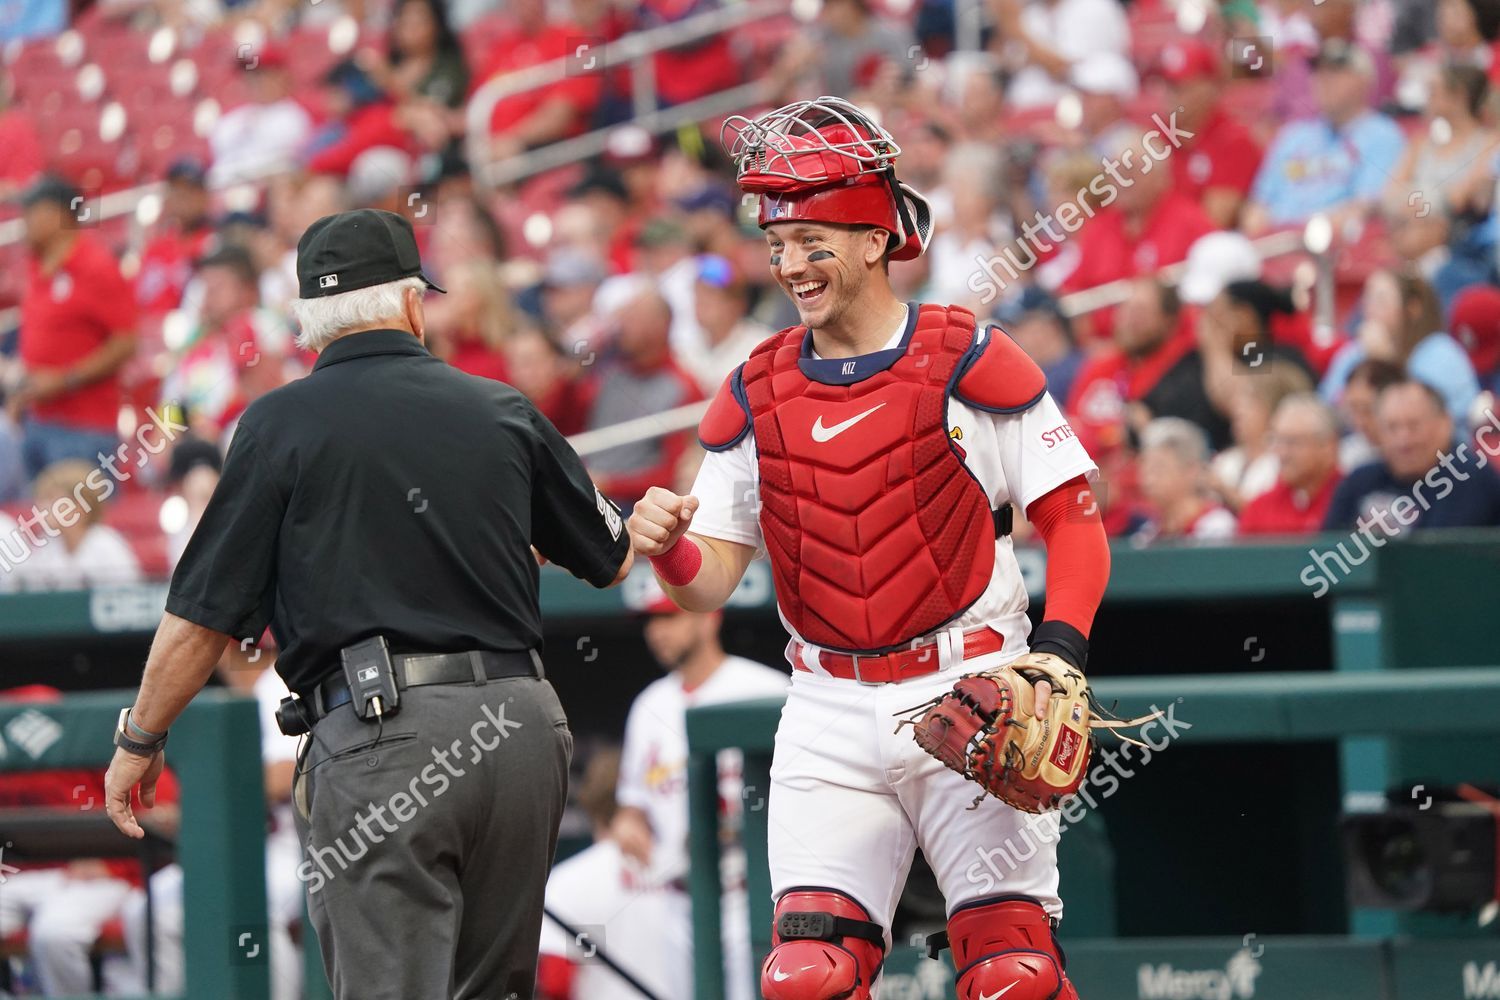 St Louis Cardinals Catcher Andrew Knizner Editorial Stock Photo